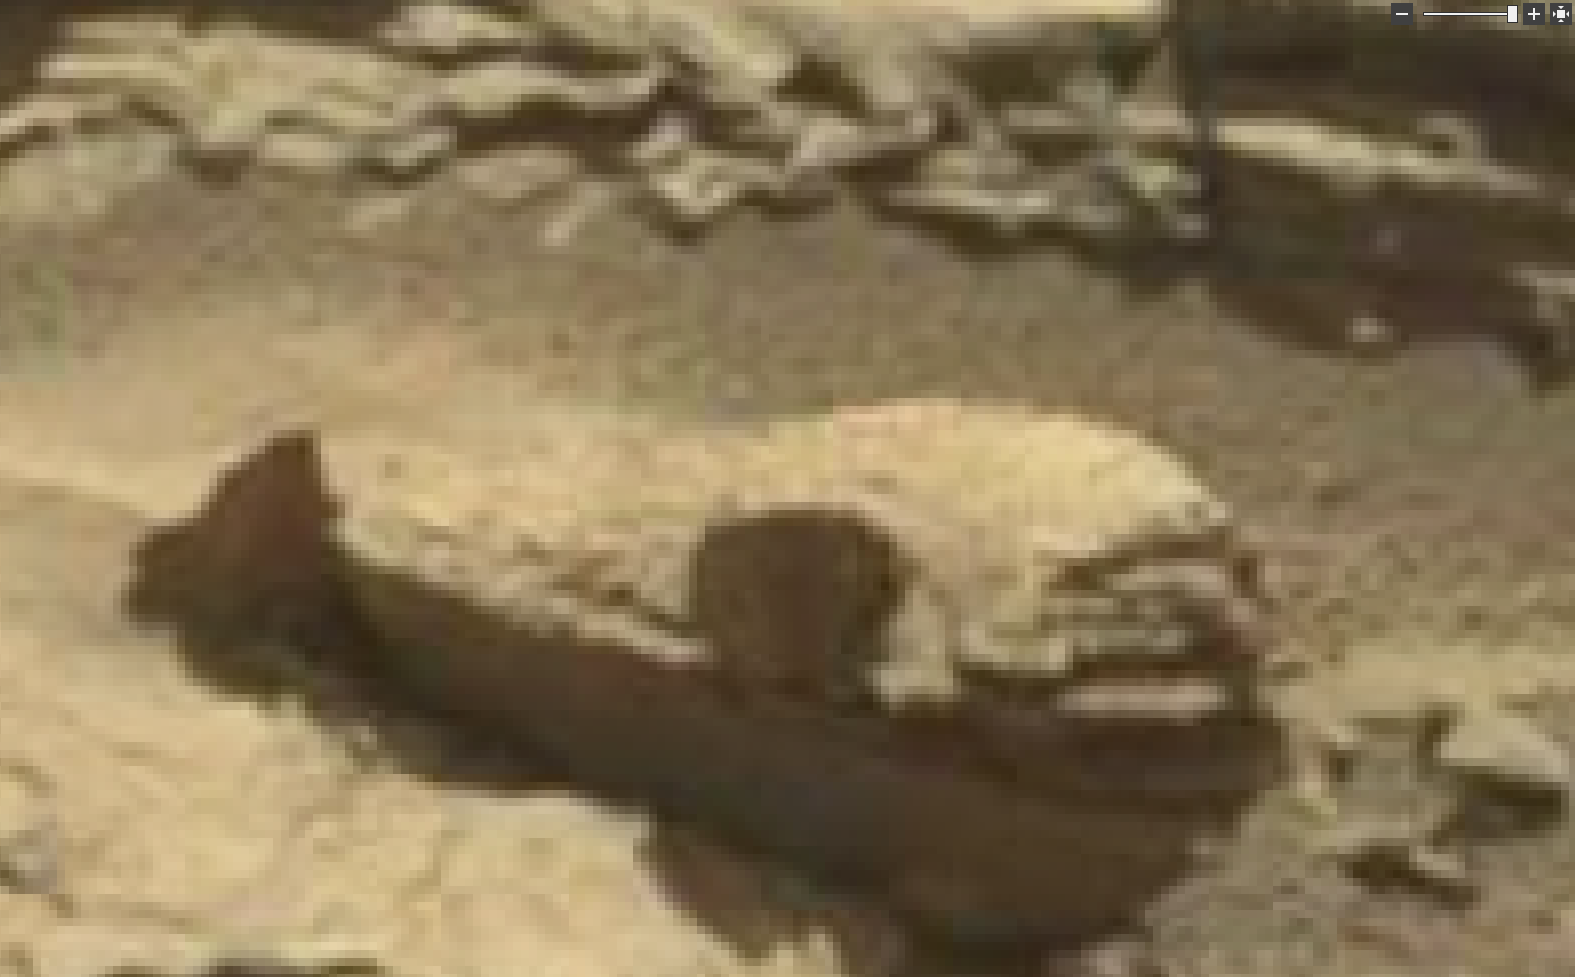 mars sol 1298 anomaly-artifacts 1b was life on mars